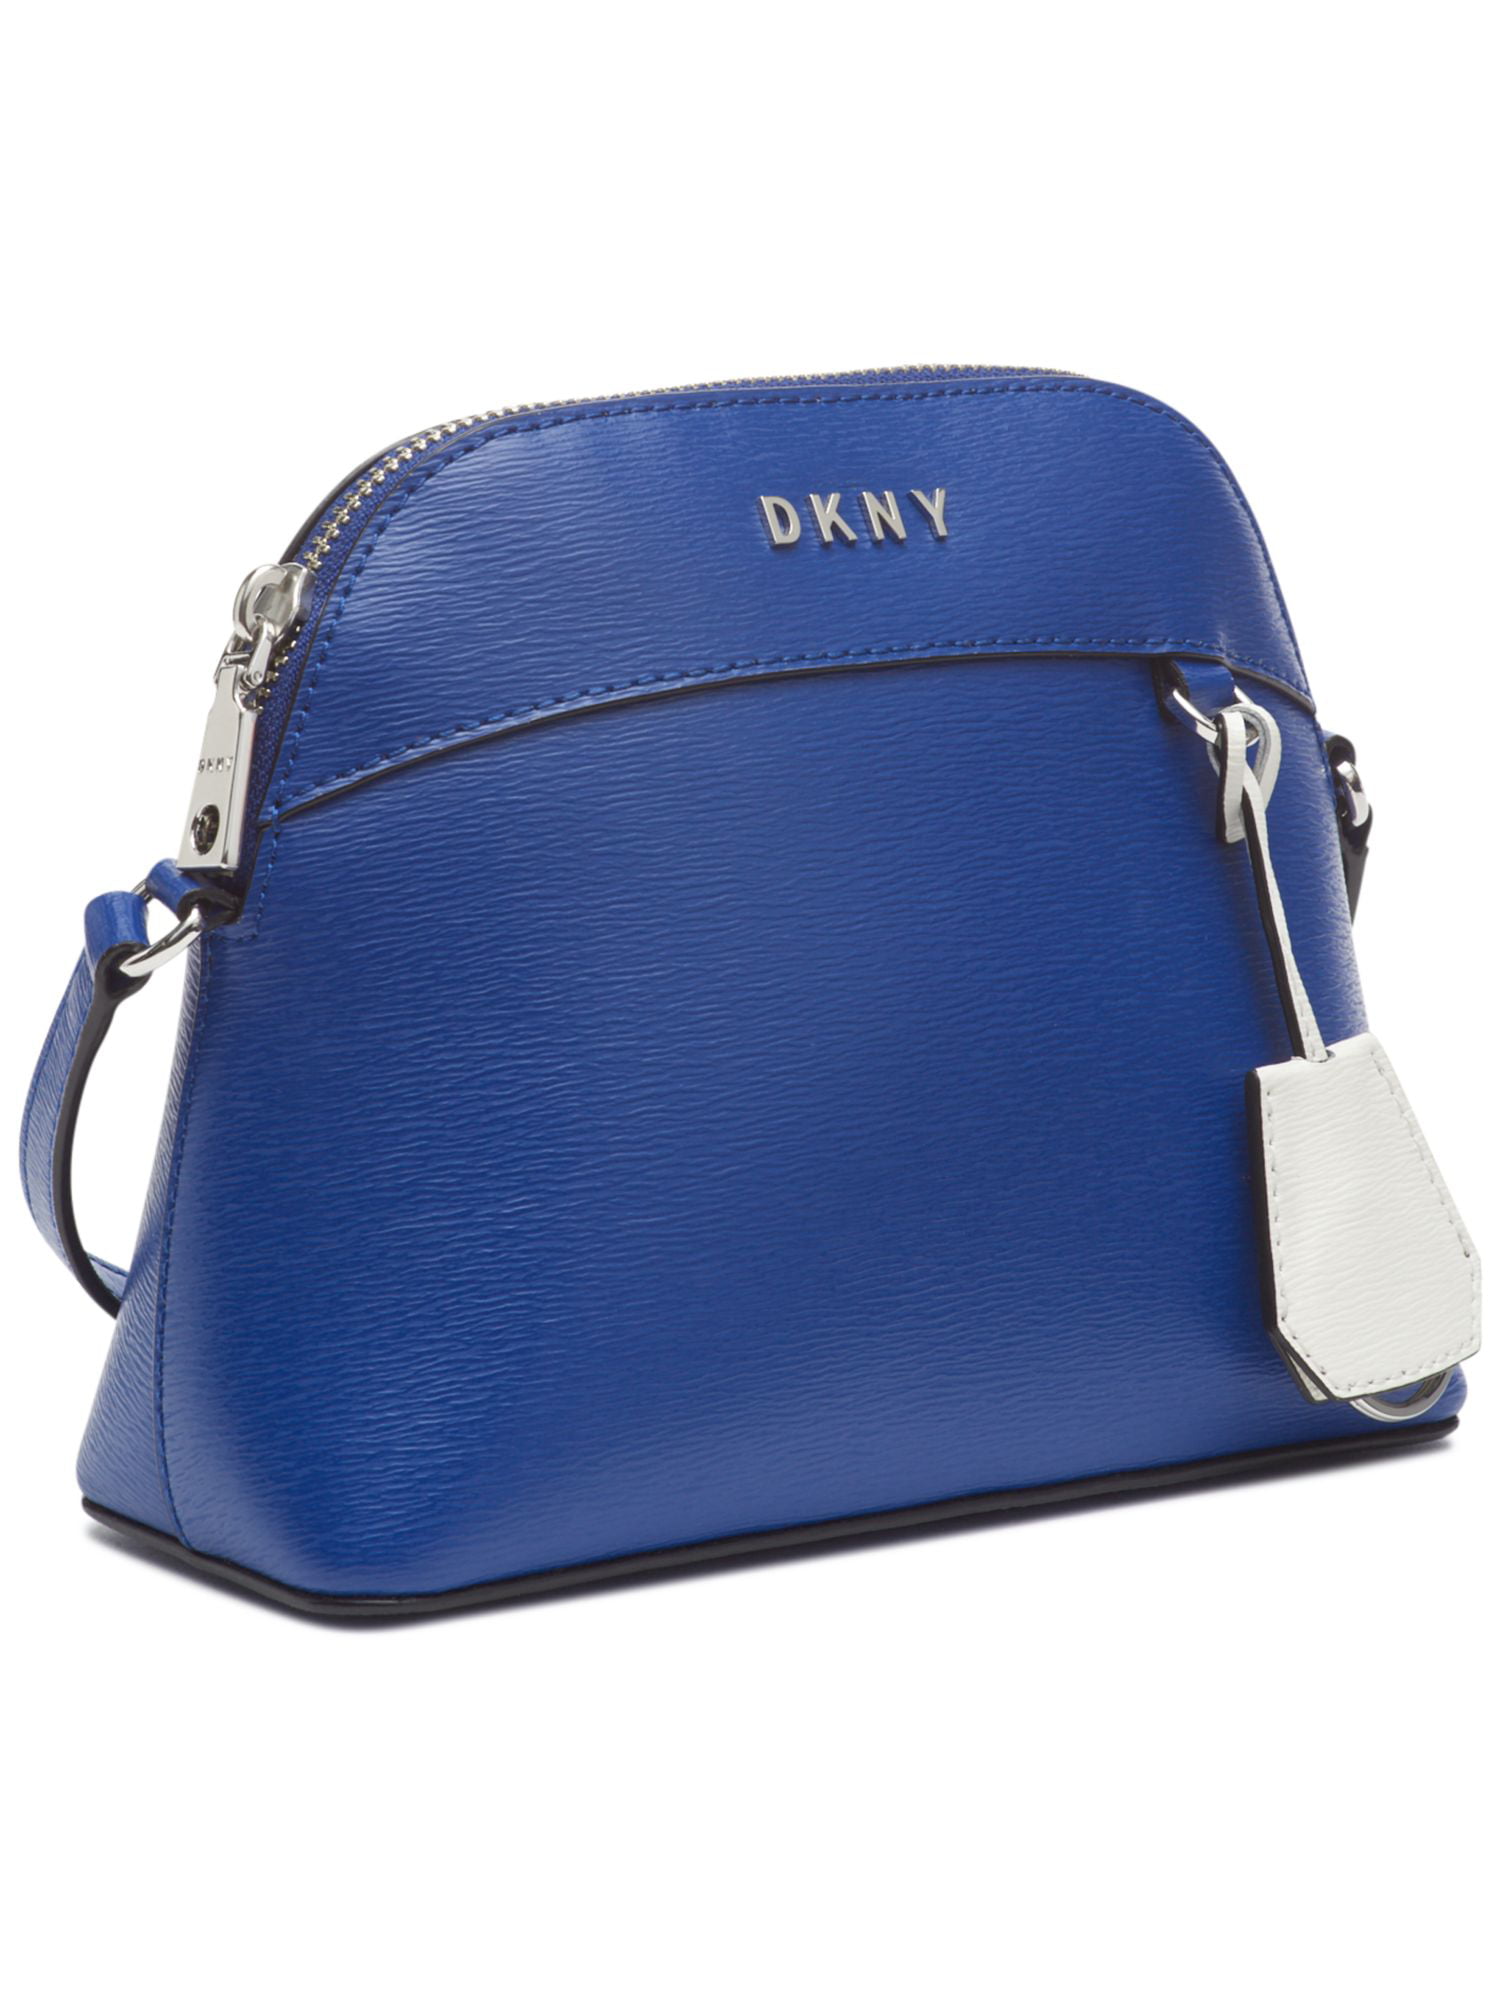 DKNY Sling And Cross Bags : Buy Dkny Allure Indigo Color ABS Hard One Size  Beauty Case Online|Nykaa Fashion